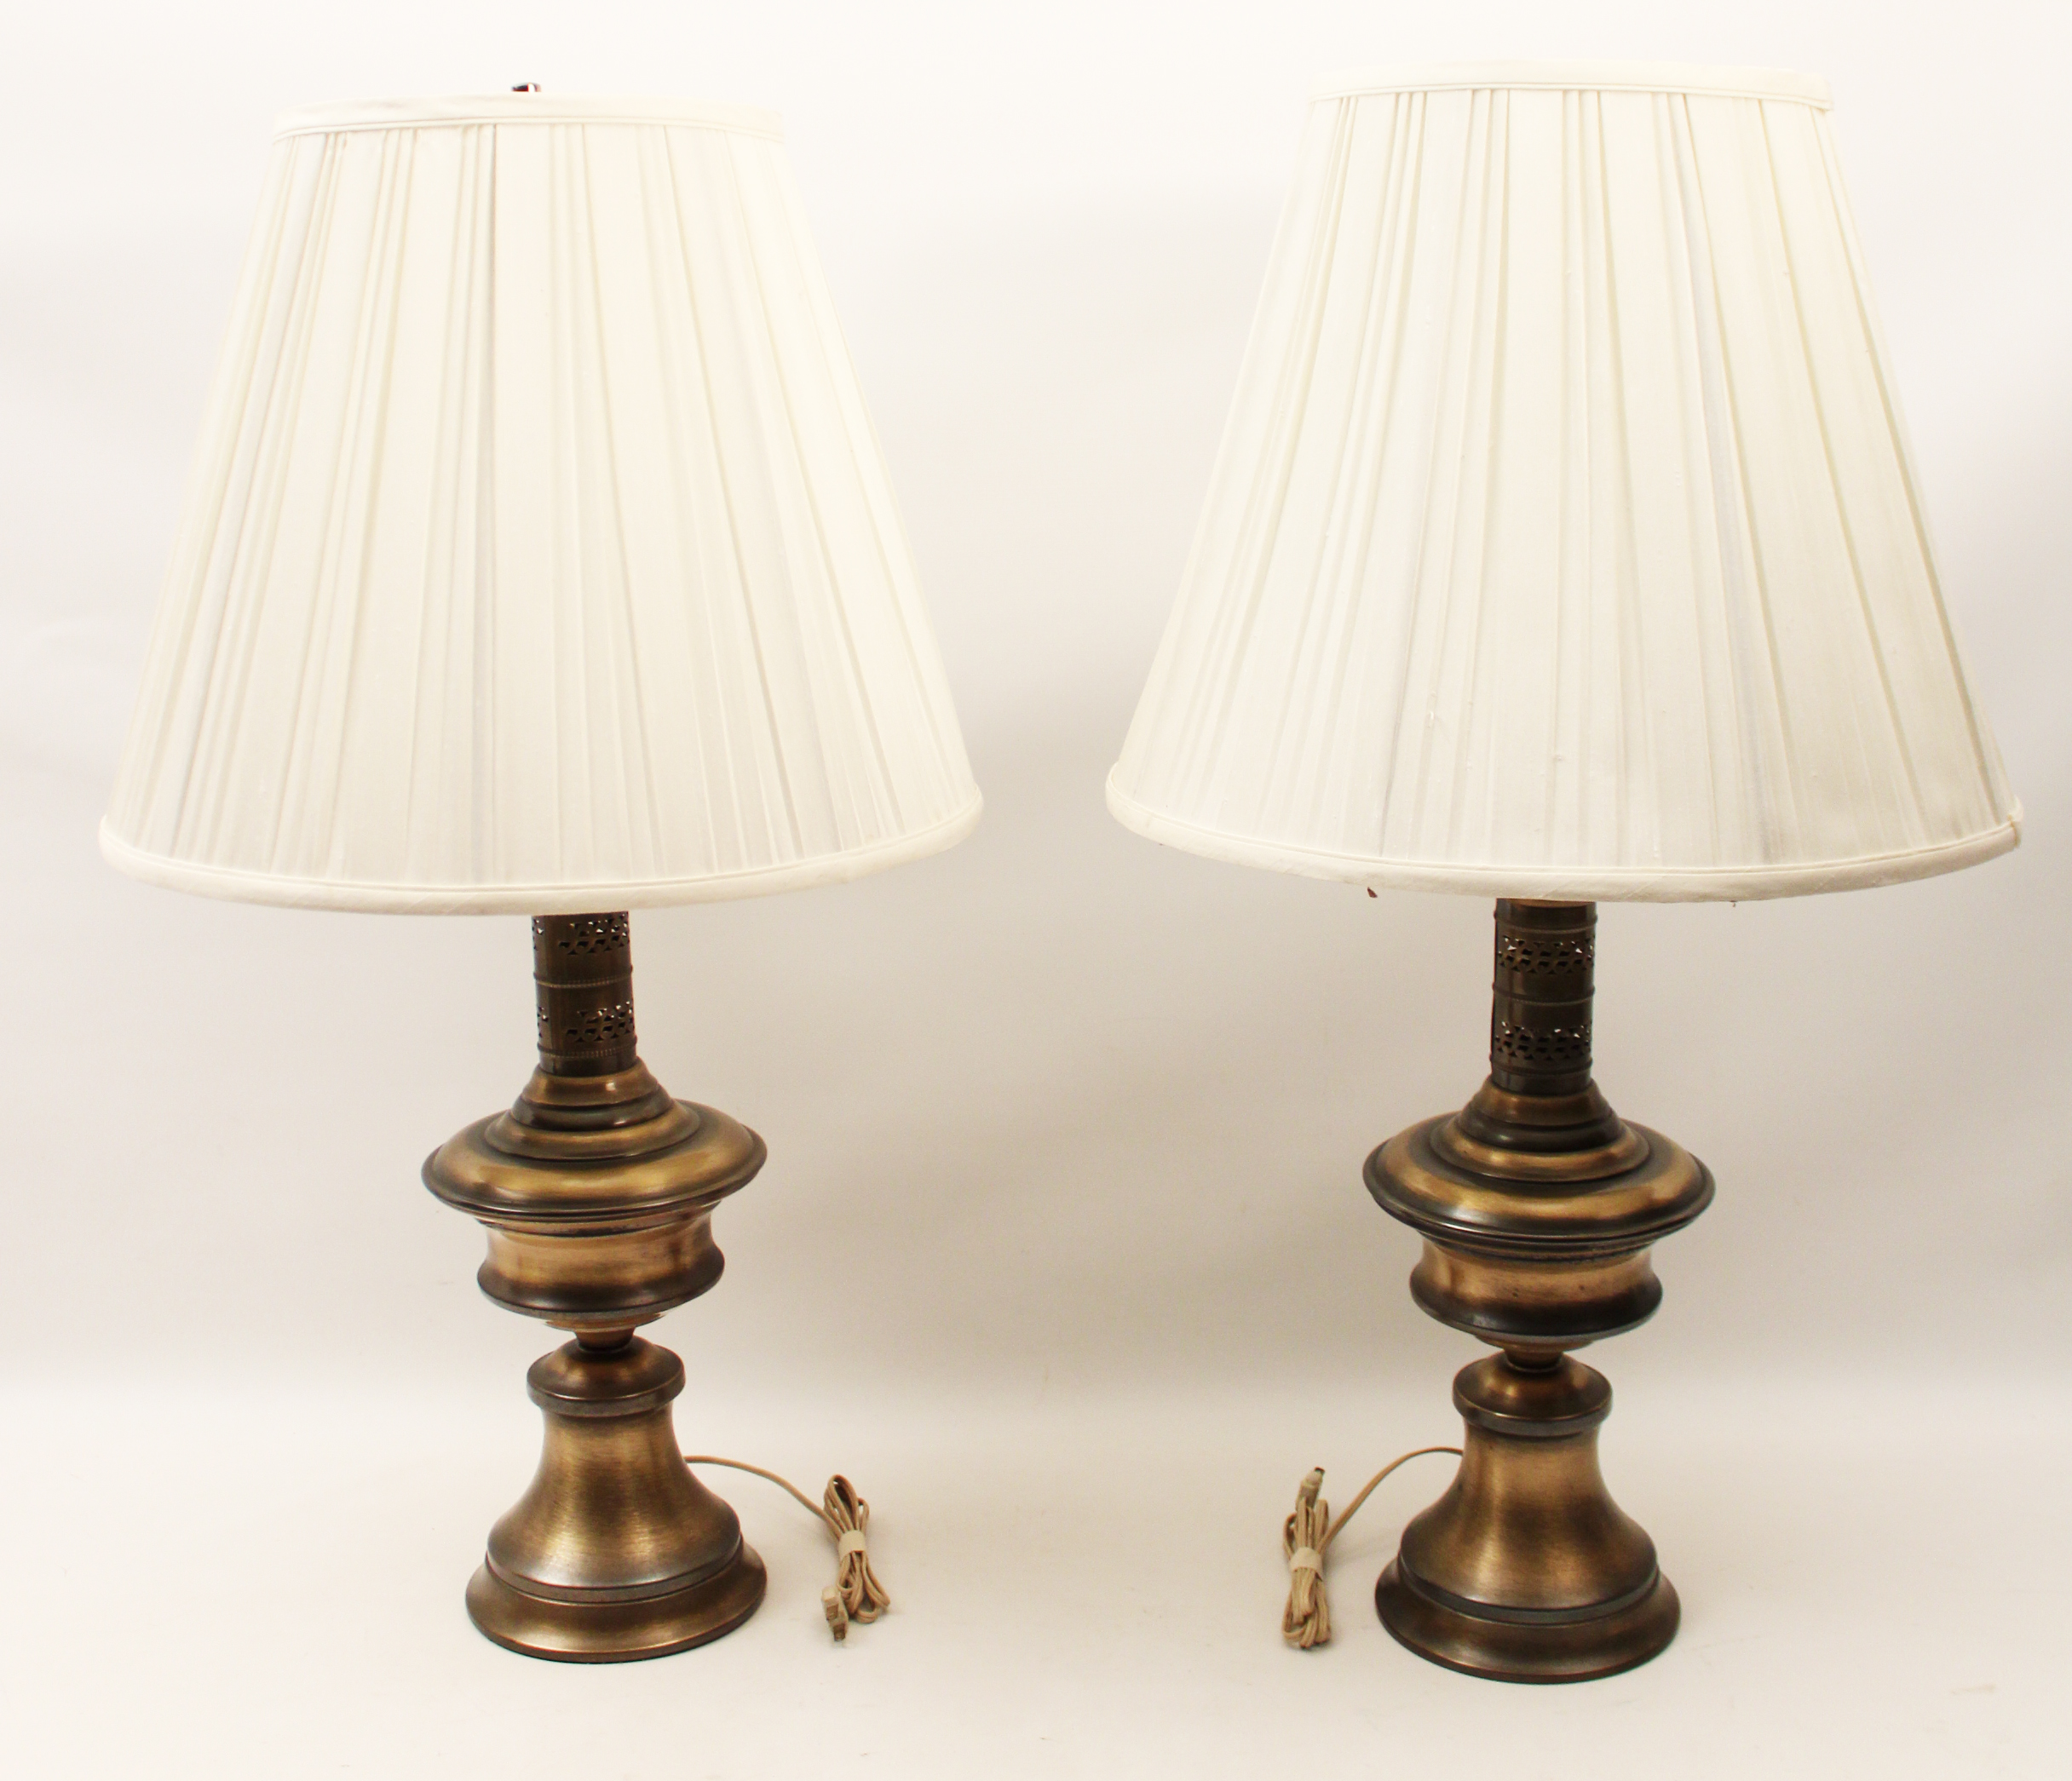 PAIR OF BRASS LAMPS PAIR OF CONTEMPORARY